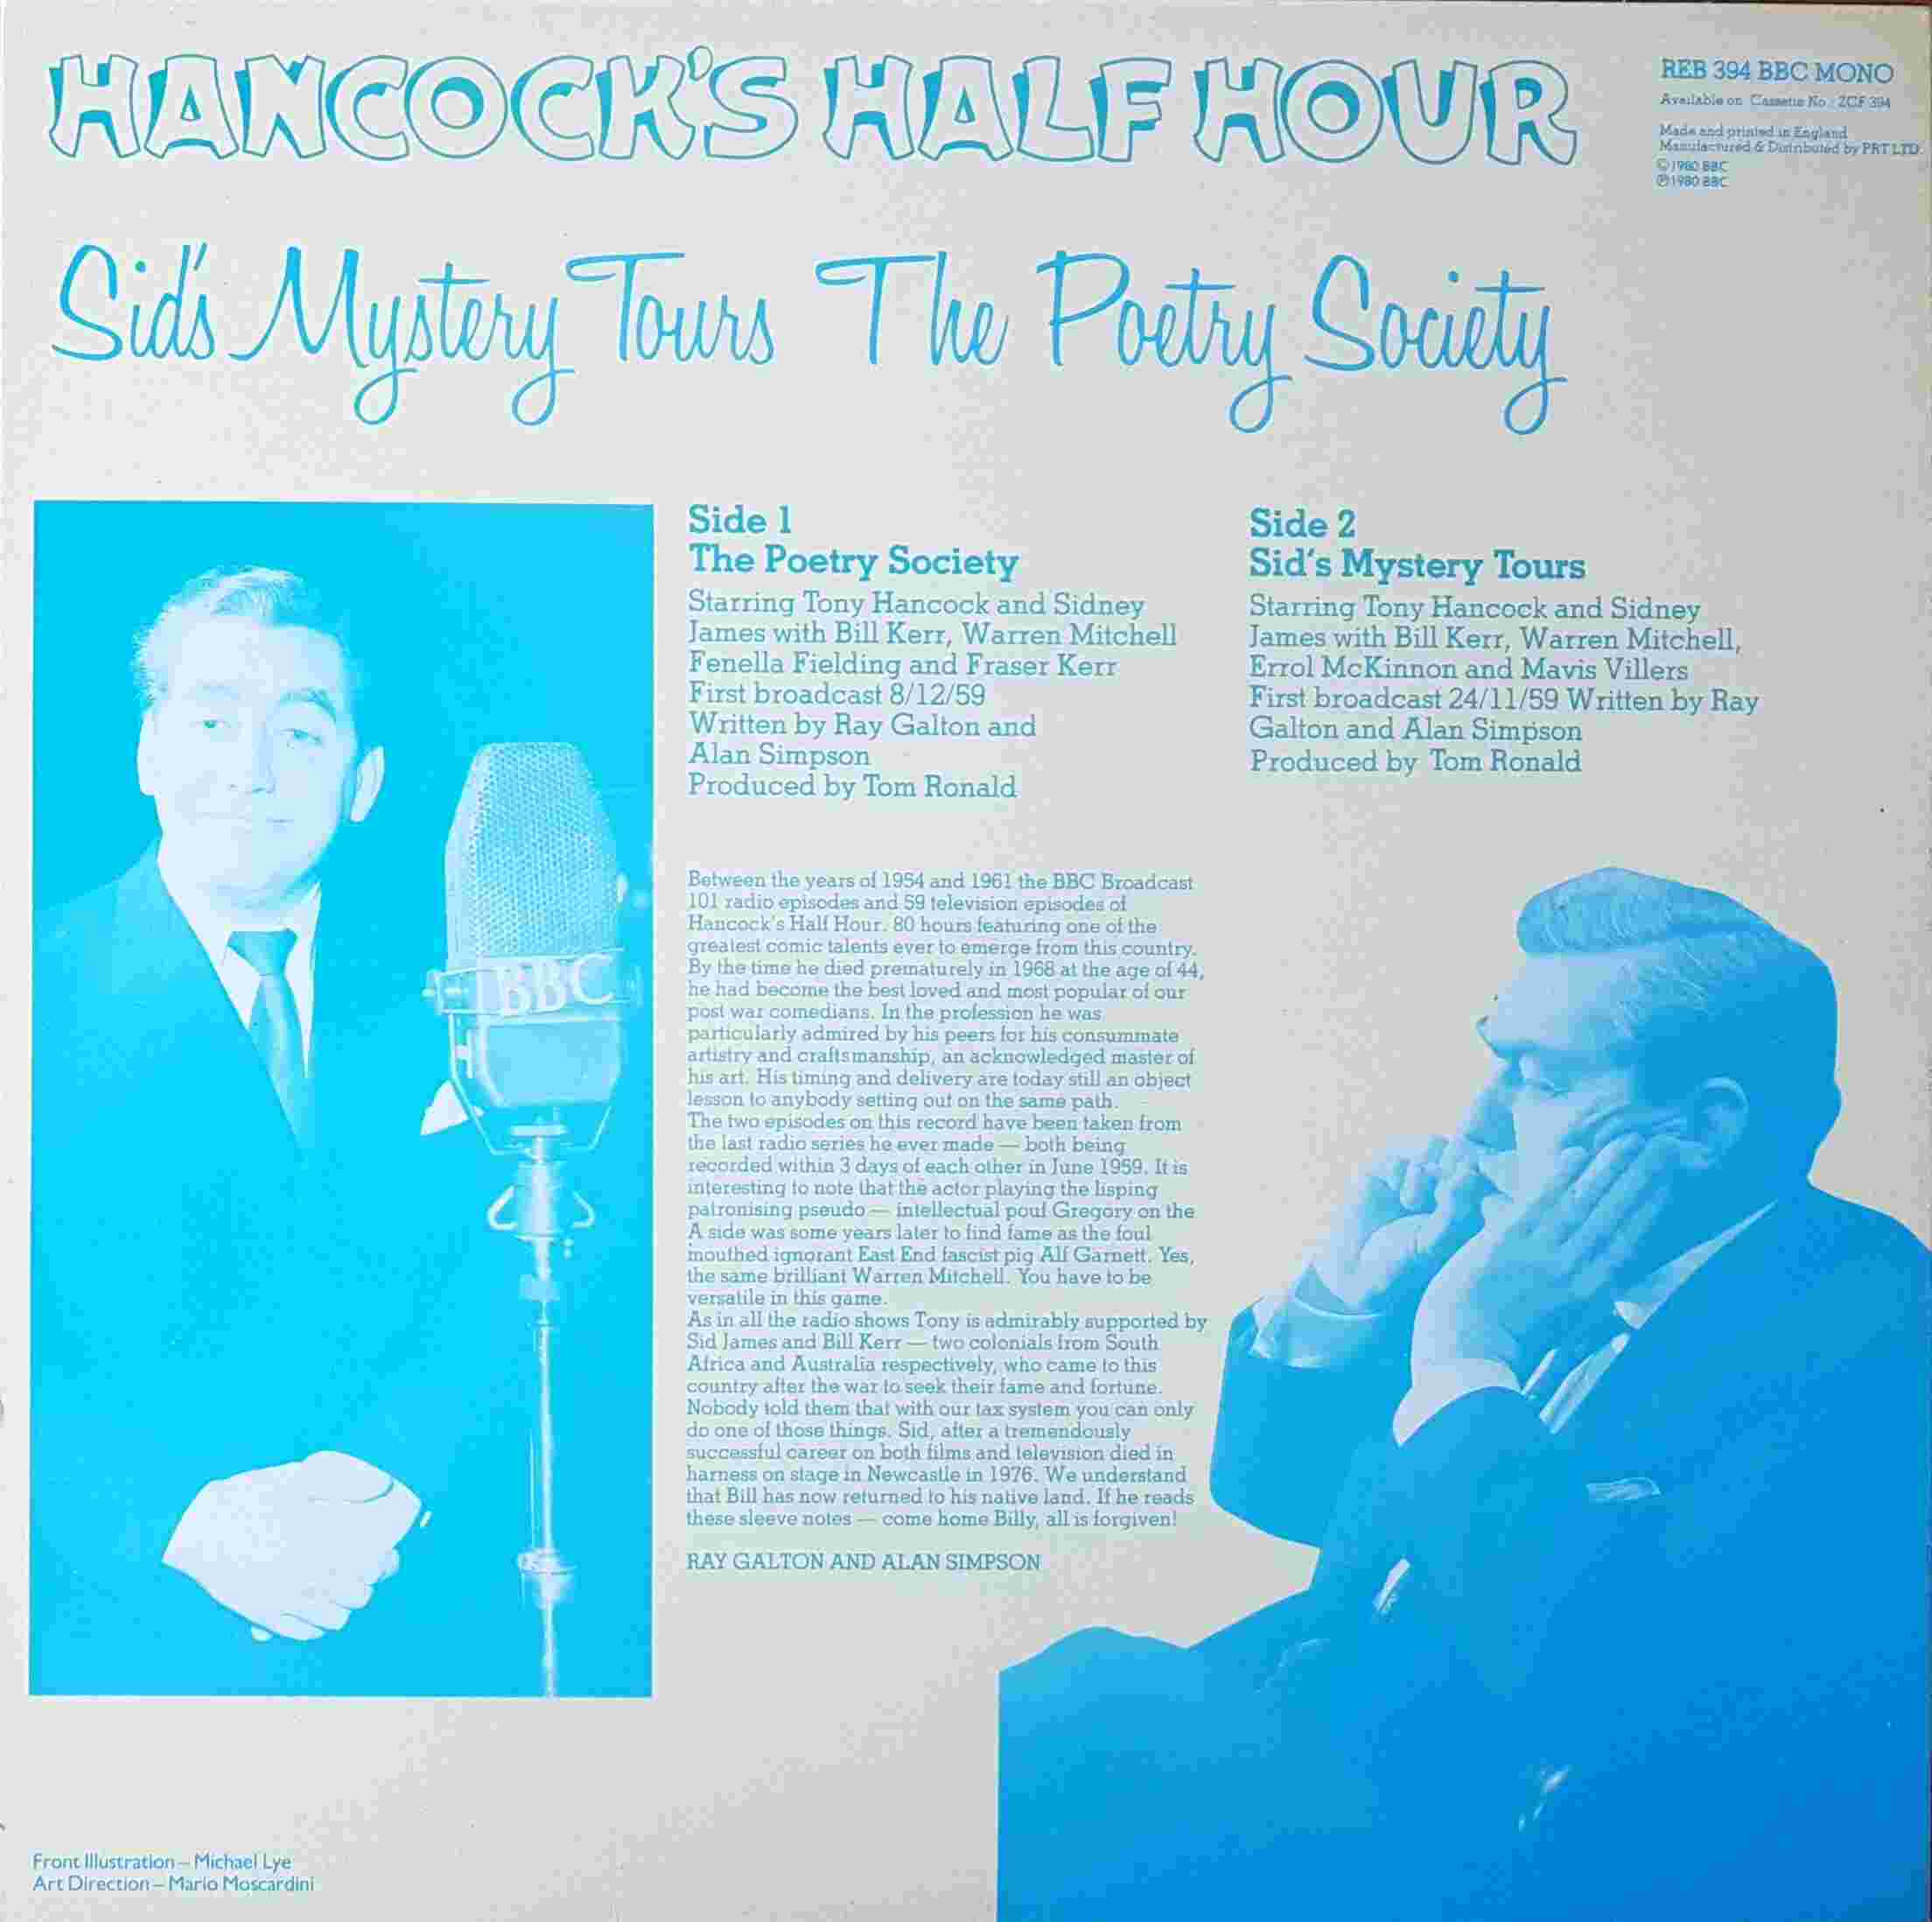 Picture of REB 394 Hancock's half hour - Volume 1 by artist Tony Hancock from the BBC records and Tapes library